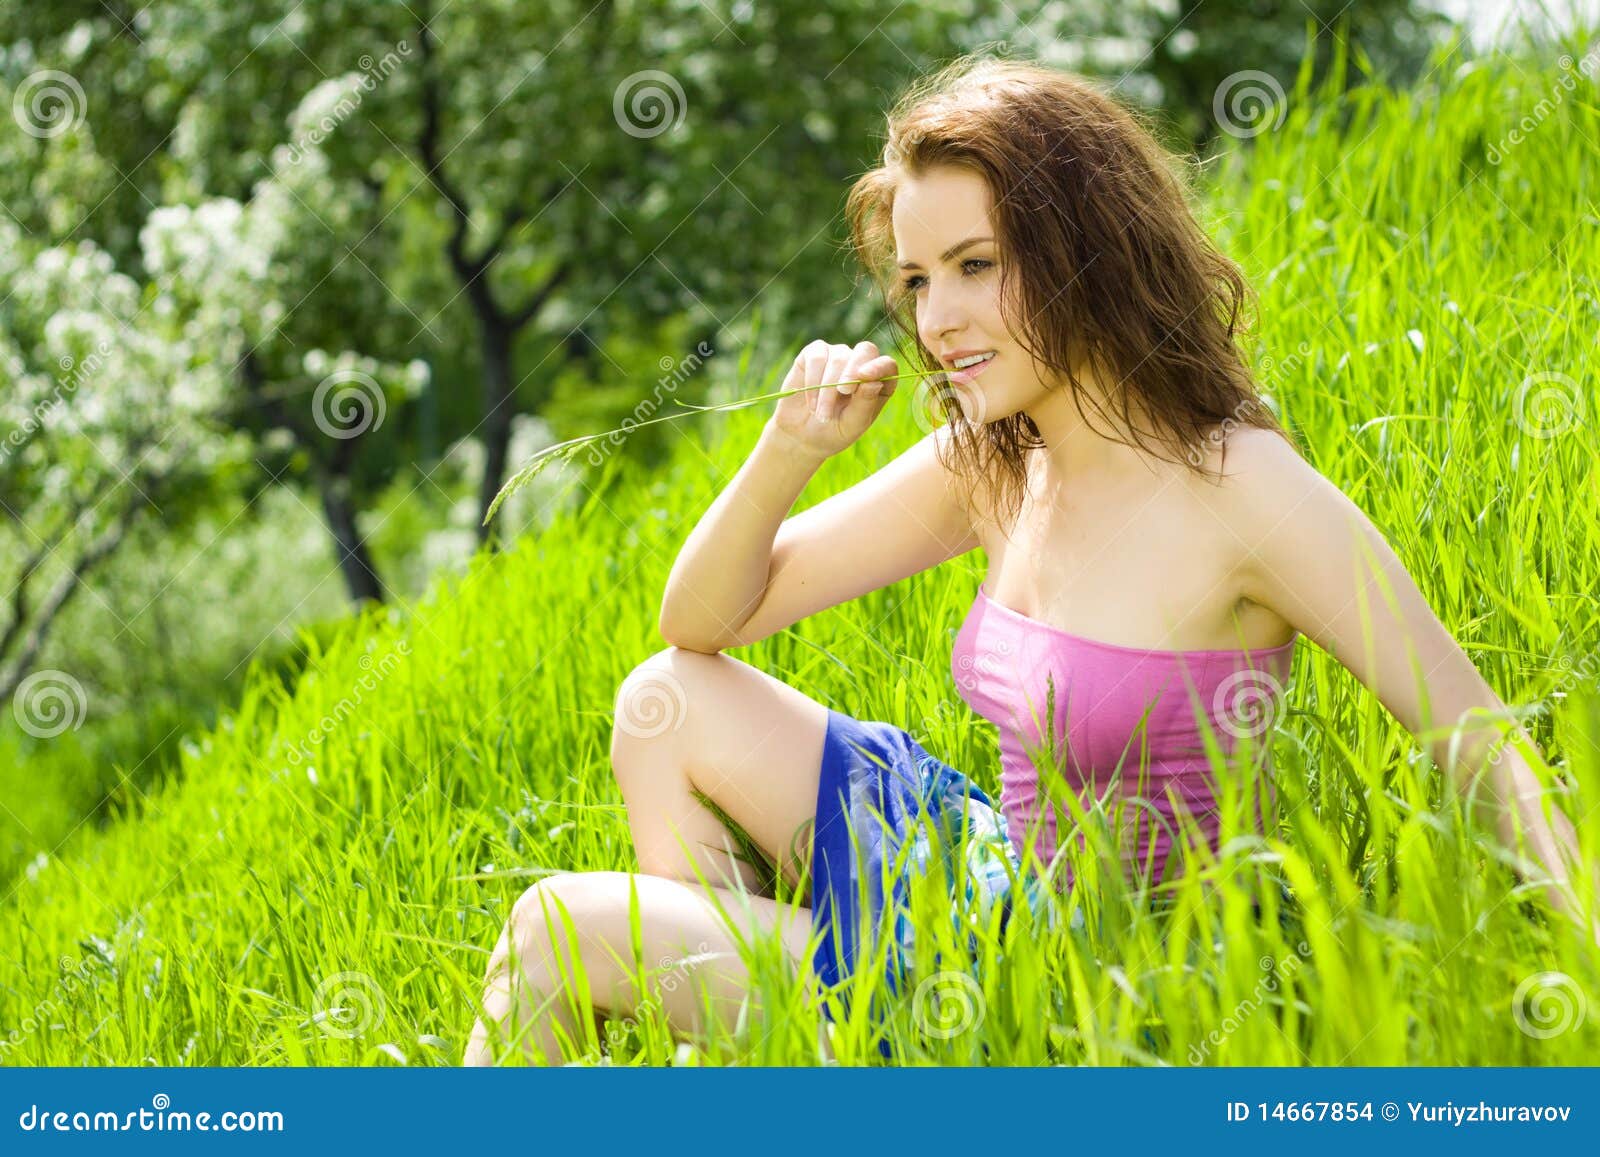 young beautiful woman reverie in grass